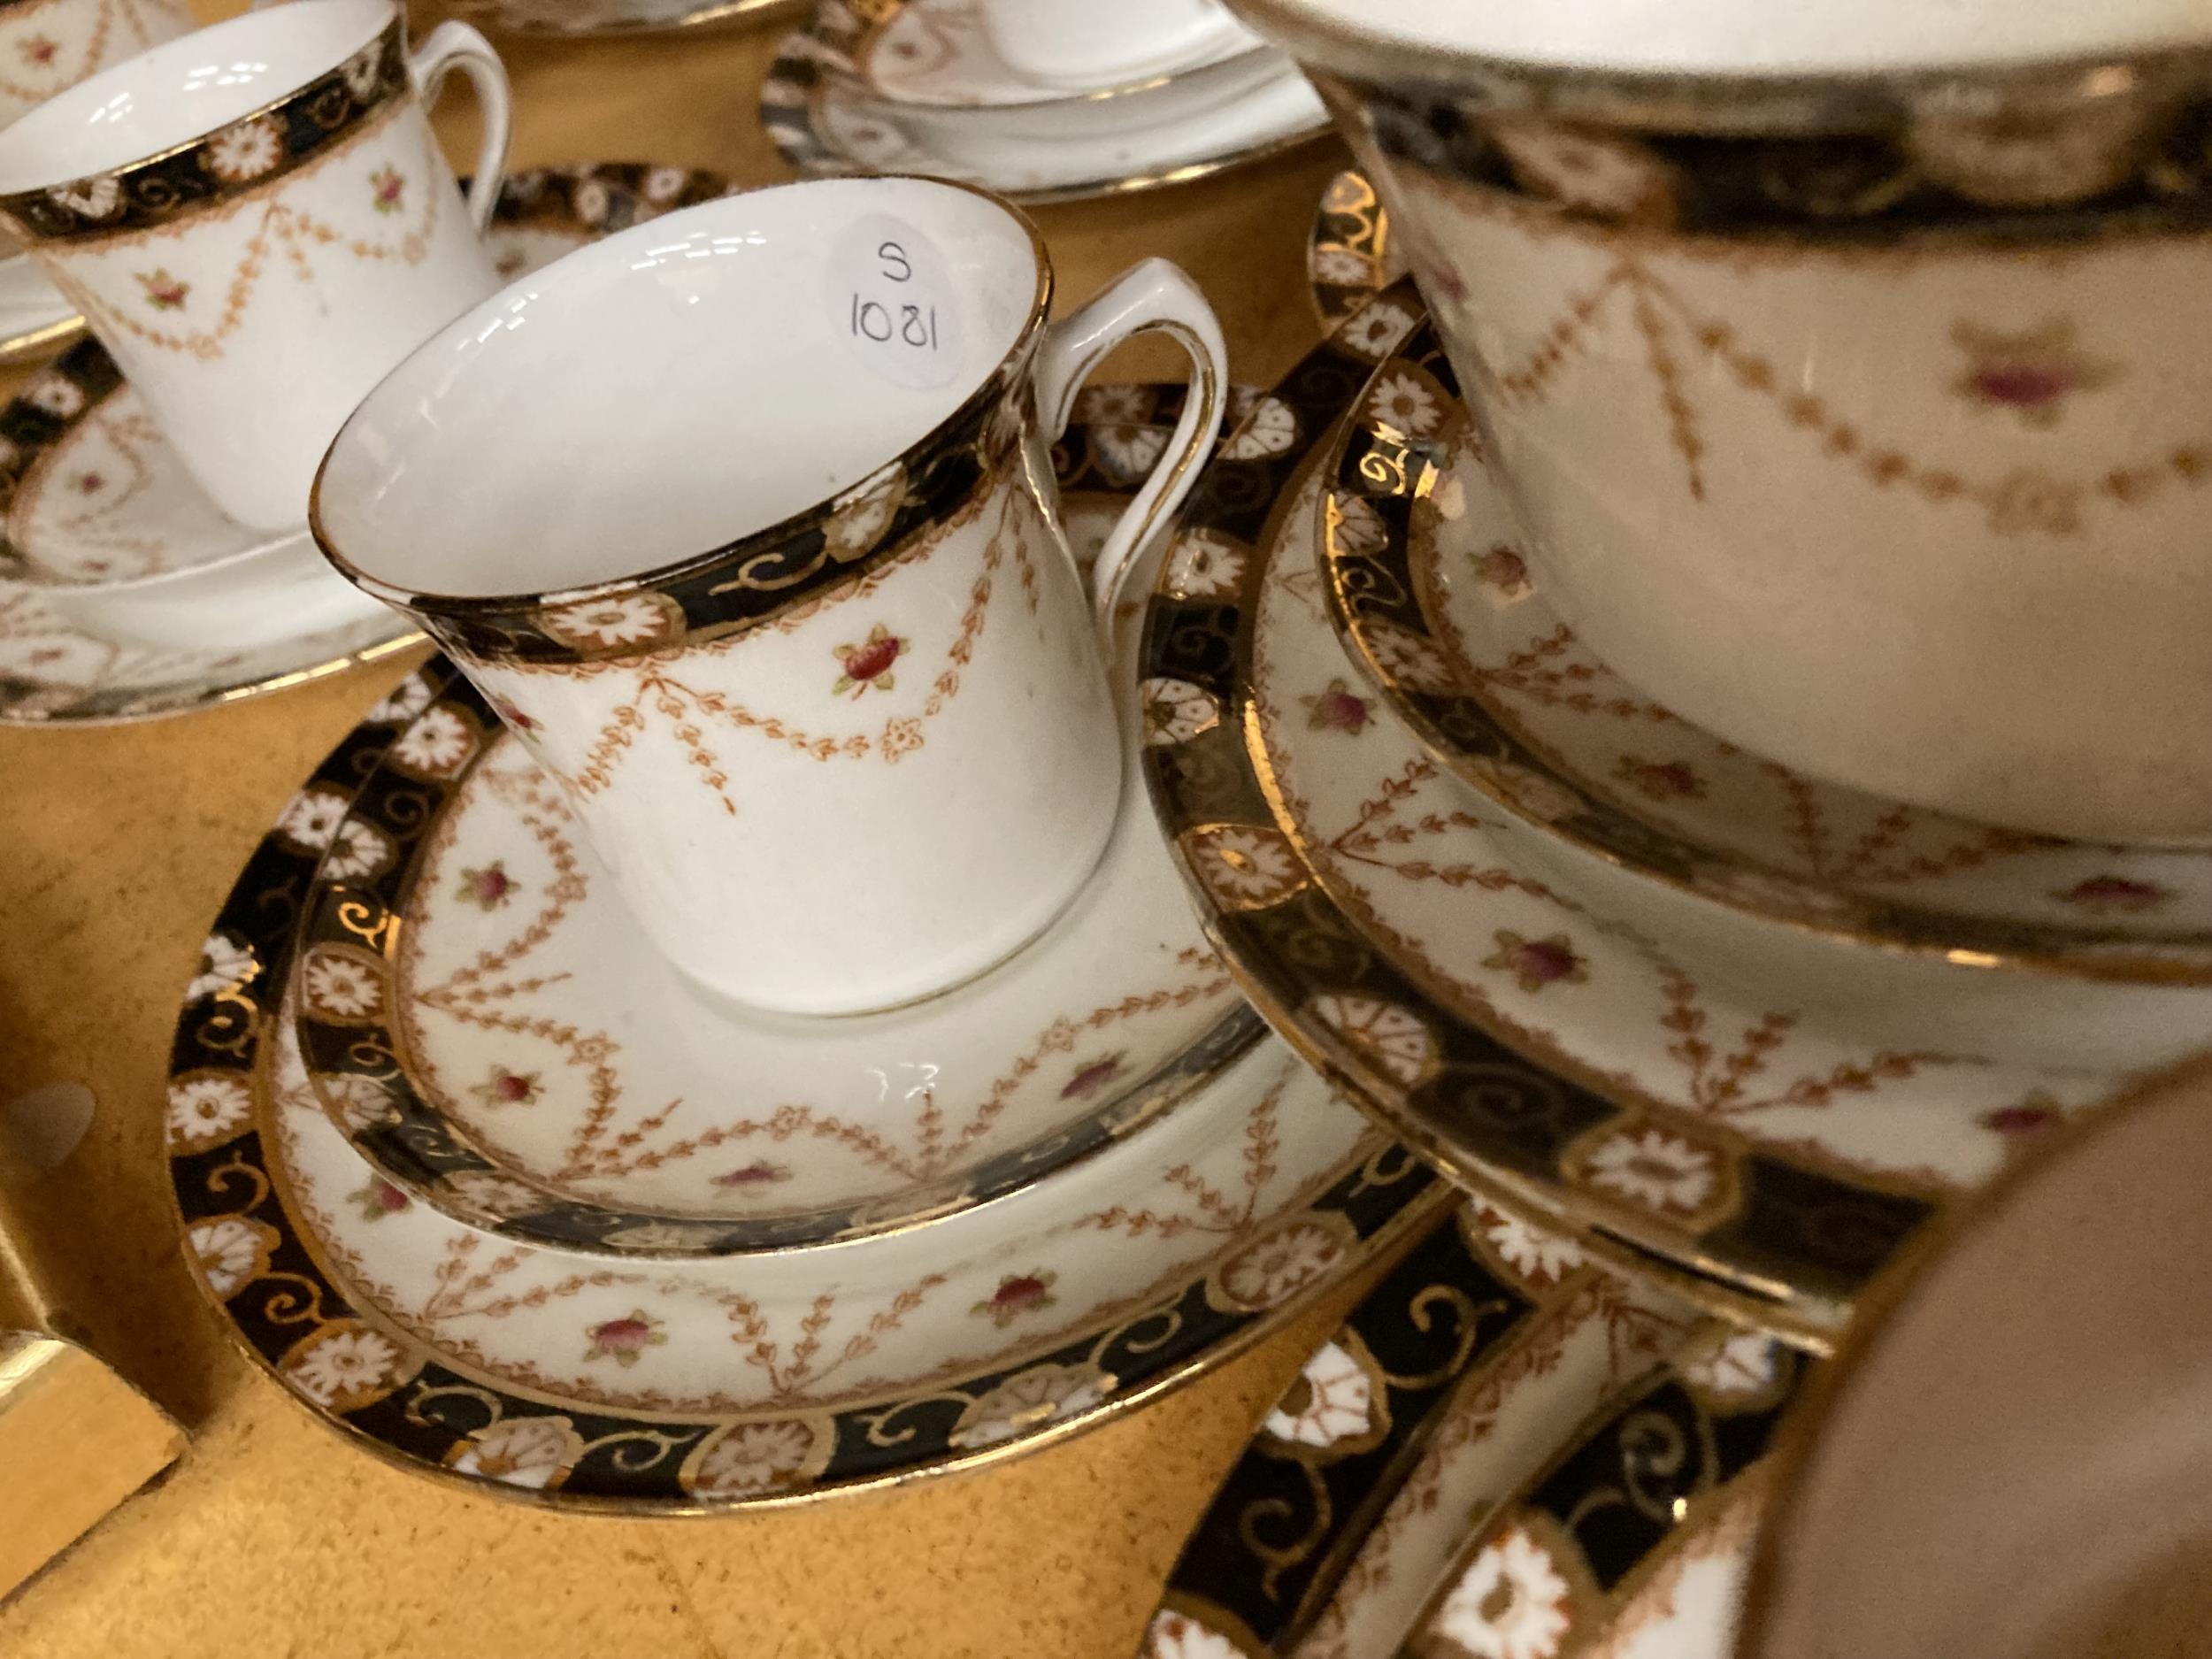 AN EDWARDIAN BONE CHINA PART TEA SERVICE TO INCLUDE CUPS, SAUCERS, SIDE PLATES, A SUGAR BOWL, ETC - Image 7 of 10